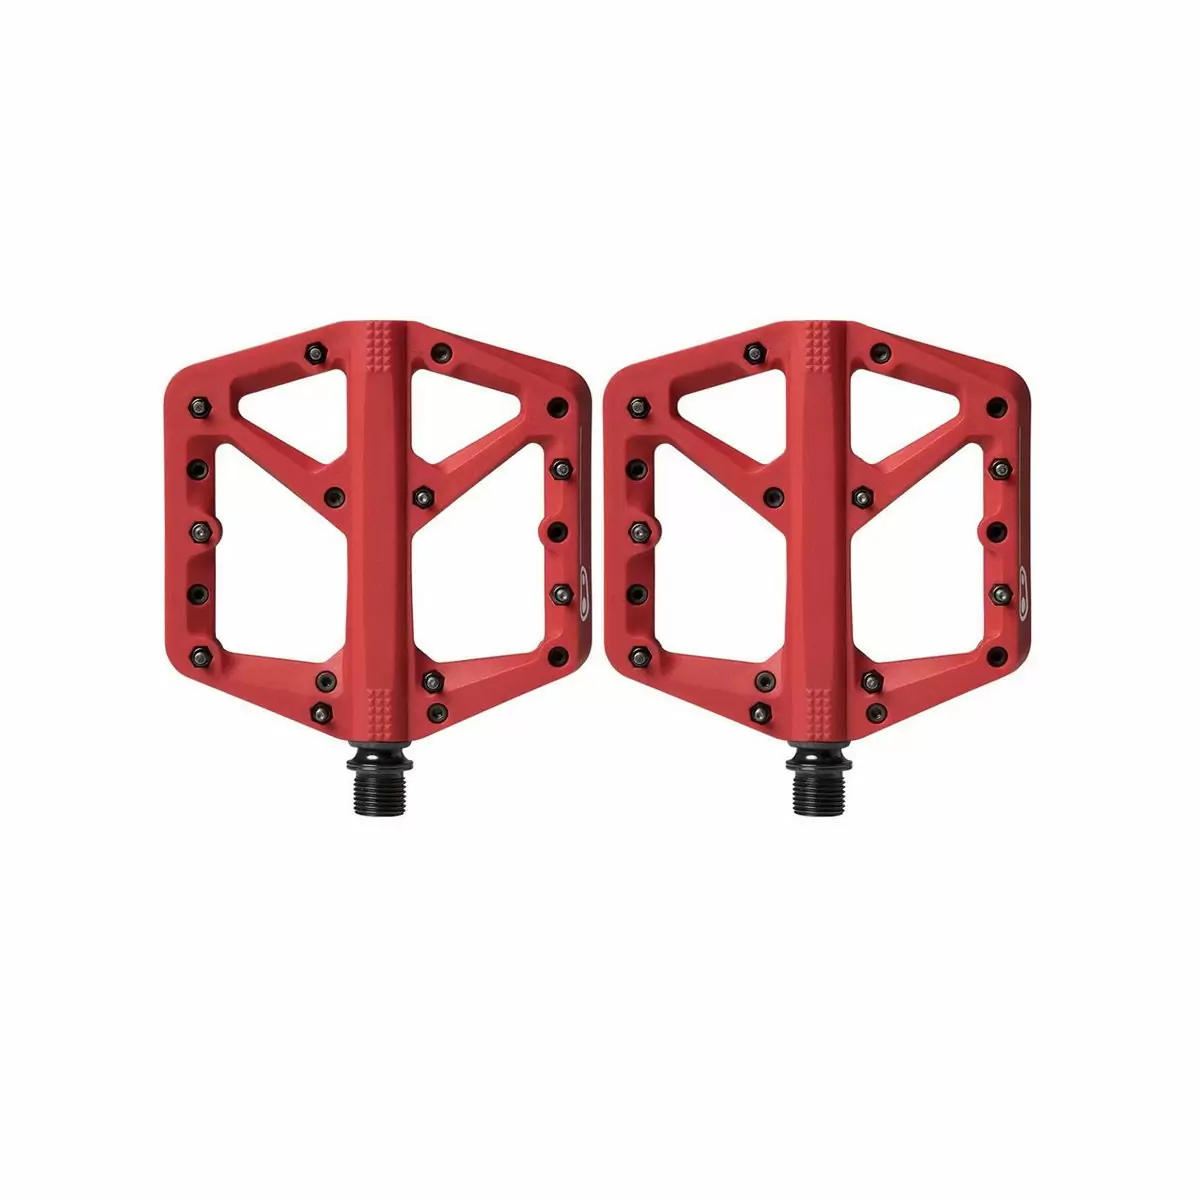 Pair of pedals Stamp 1 Small red - image